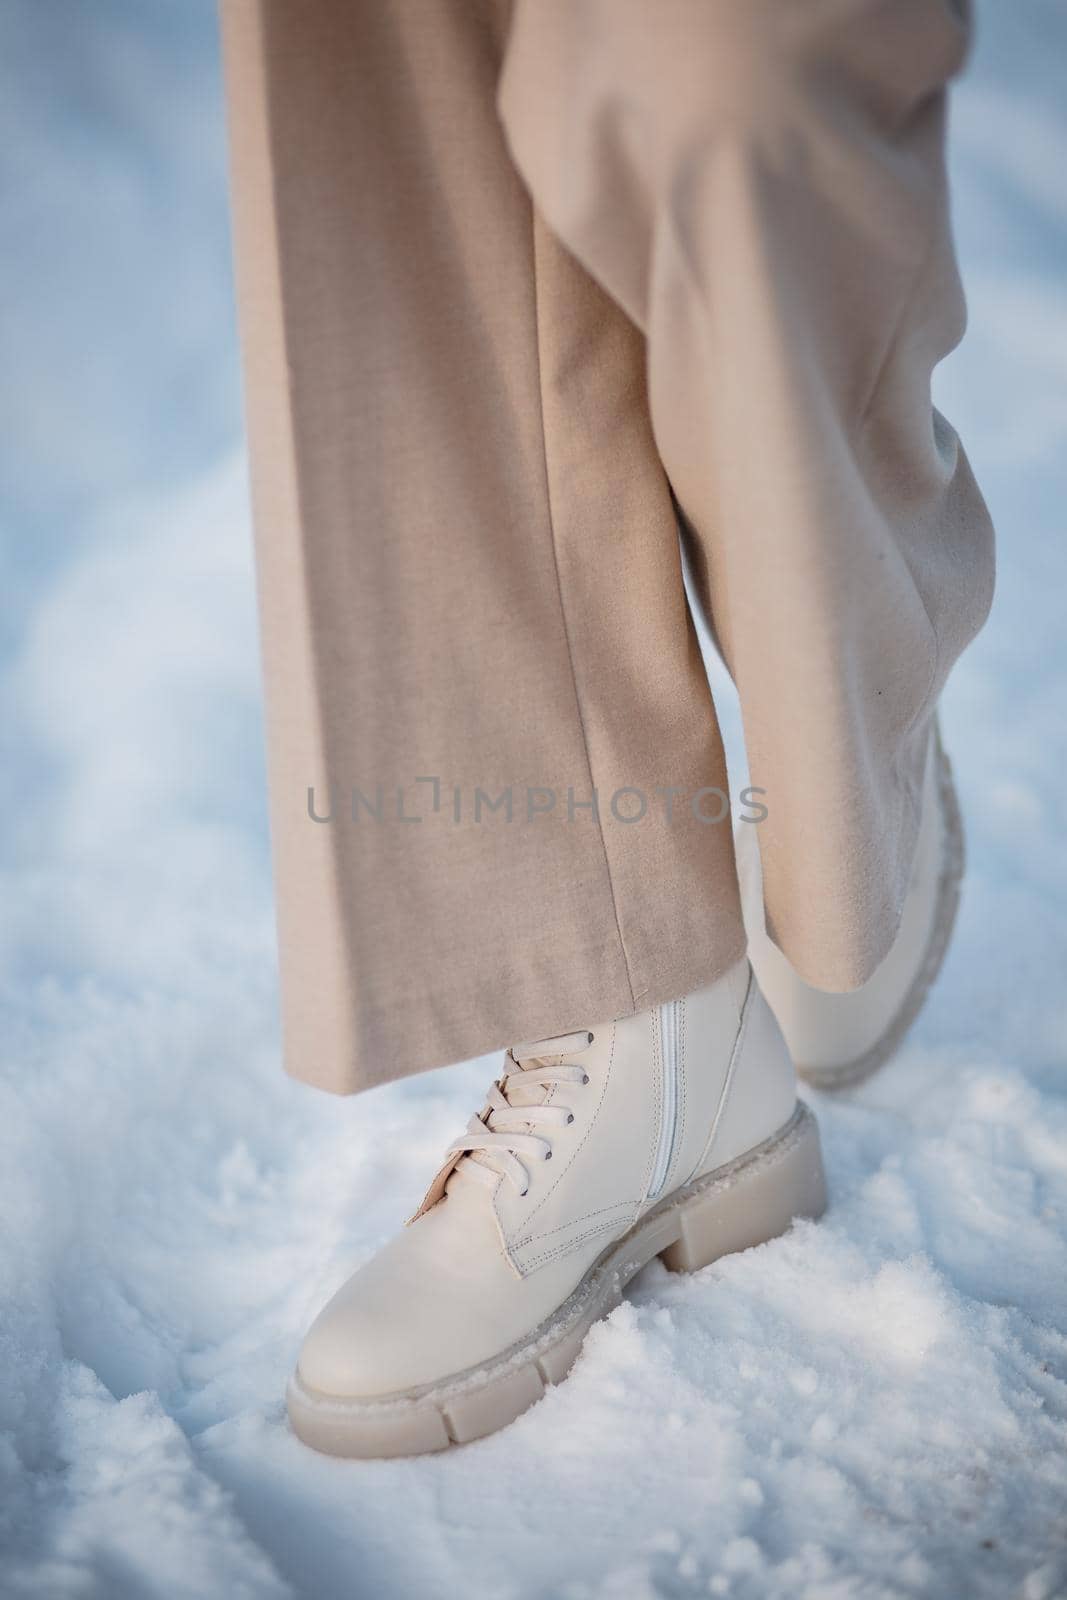 The model demonstrates women's shoes in the snow